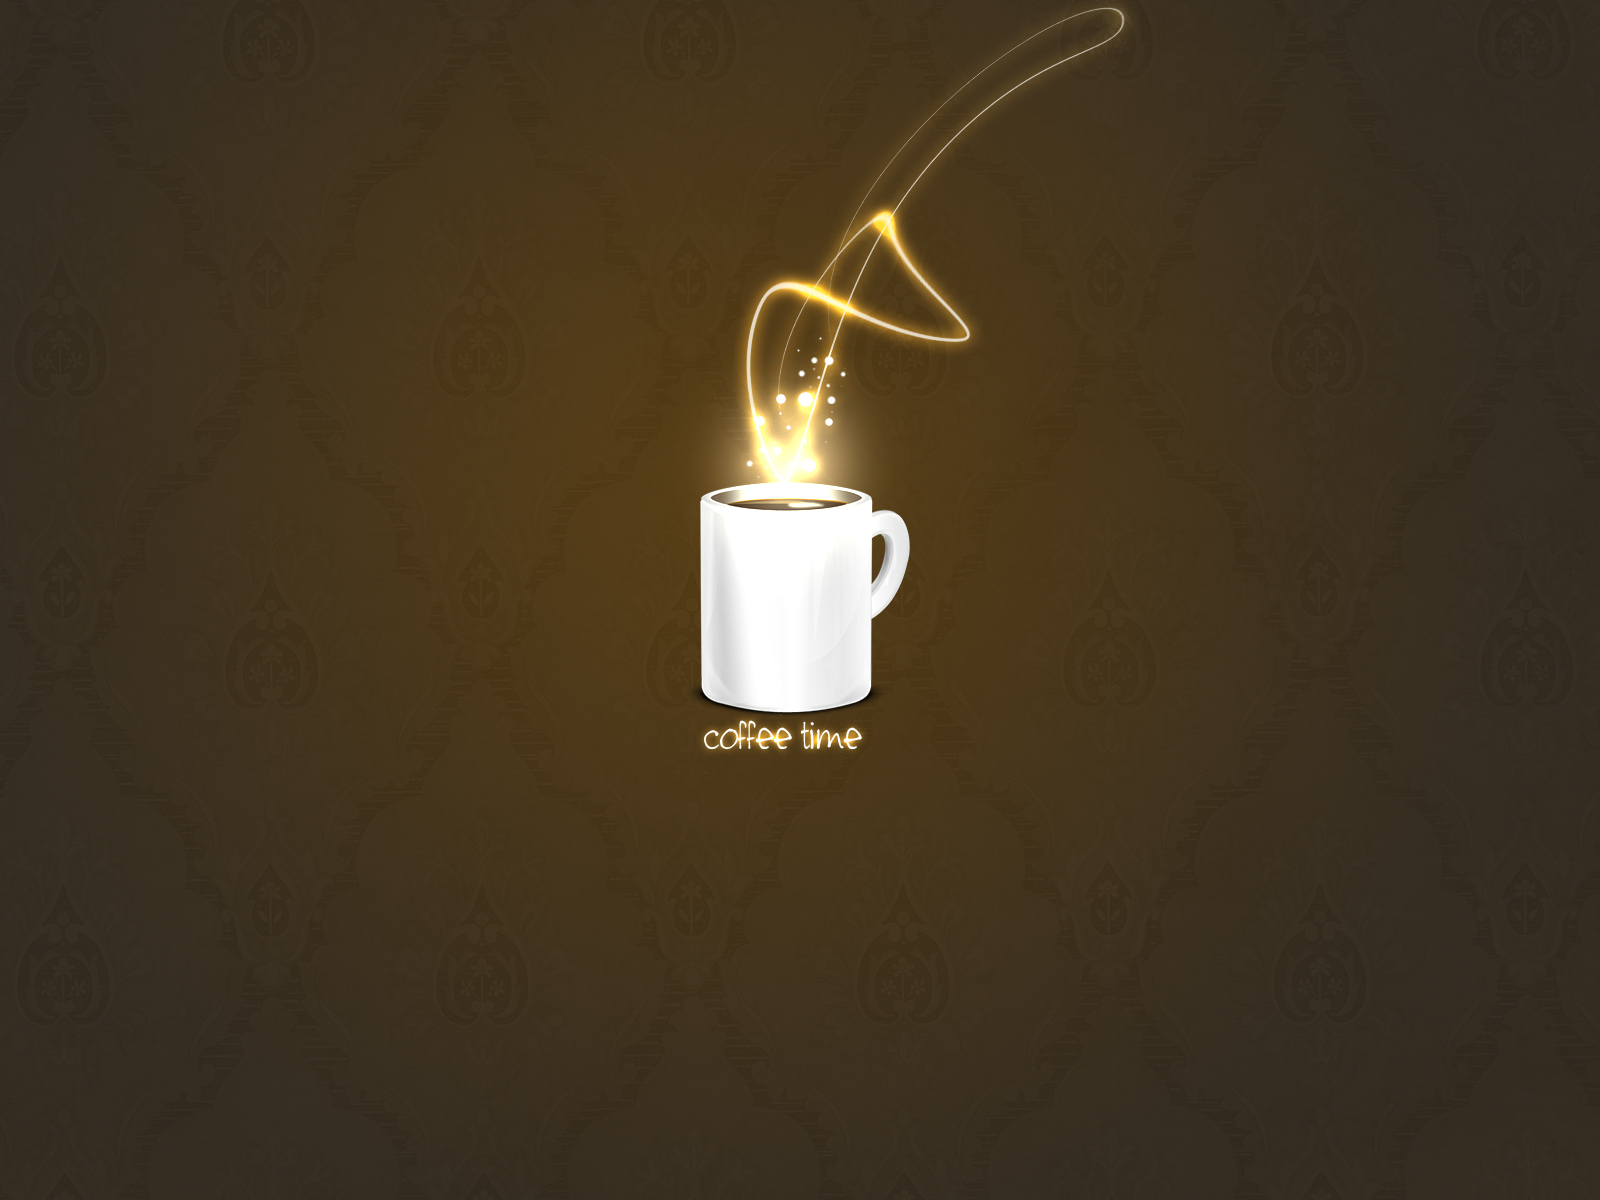  Coffee HQ Background Images